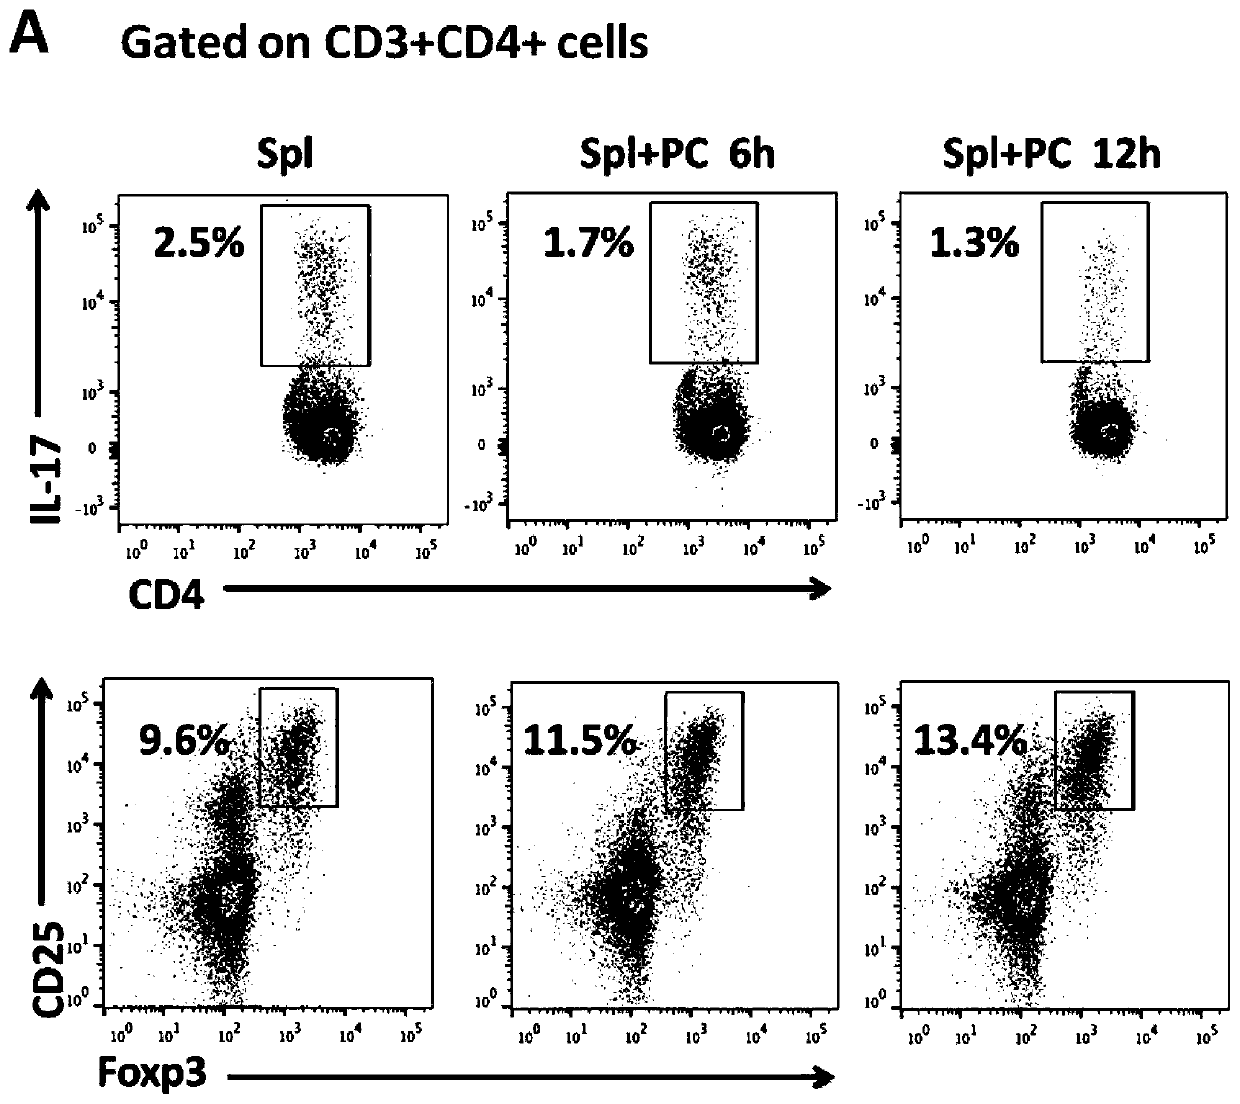 Application of peritoneal cells to induction of differentiation of T cells into regulatory T cells